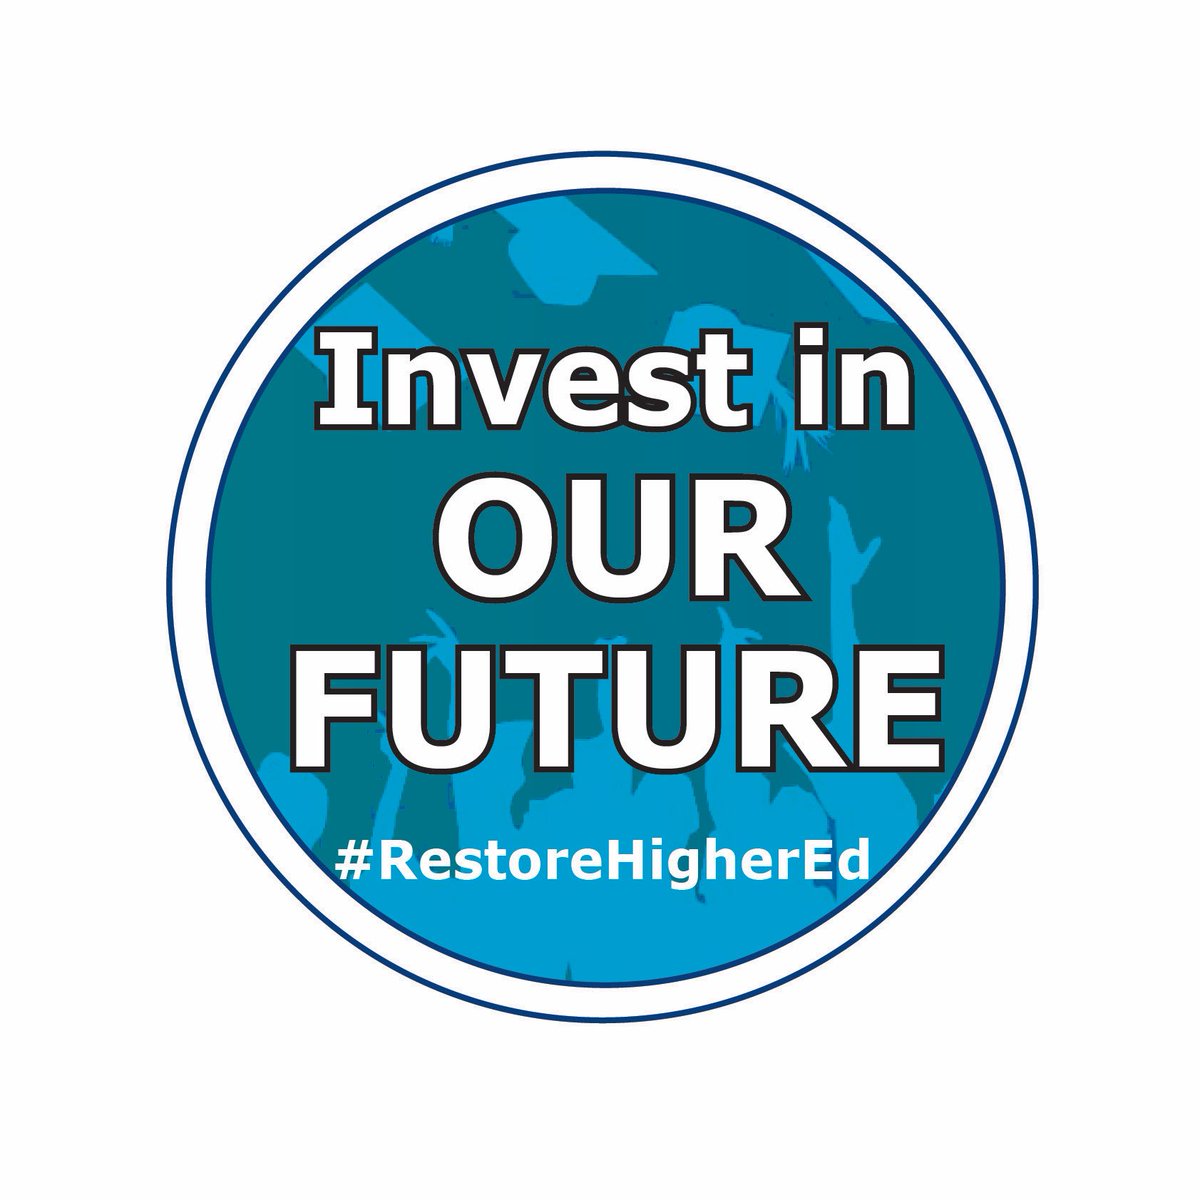 Impacts of these historic budget cuts have required higher education to eliminate or furlough faculty and staff, eliminate academic programs, reduce funding for scholarships and tuition waivers, reduce community services and close learning sites #RestoreHigherEd